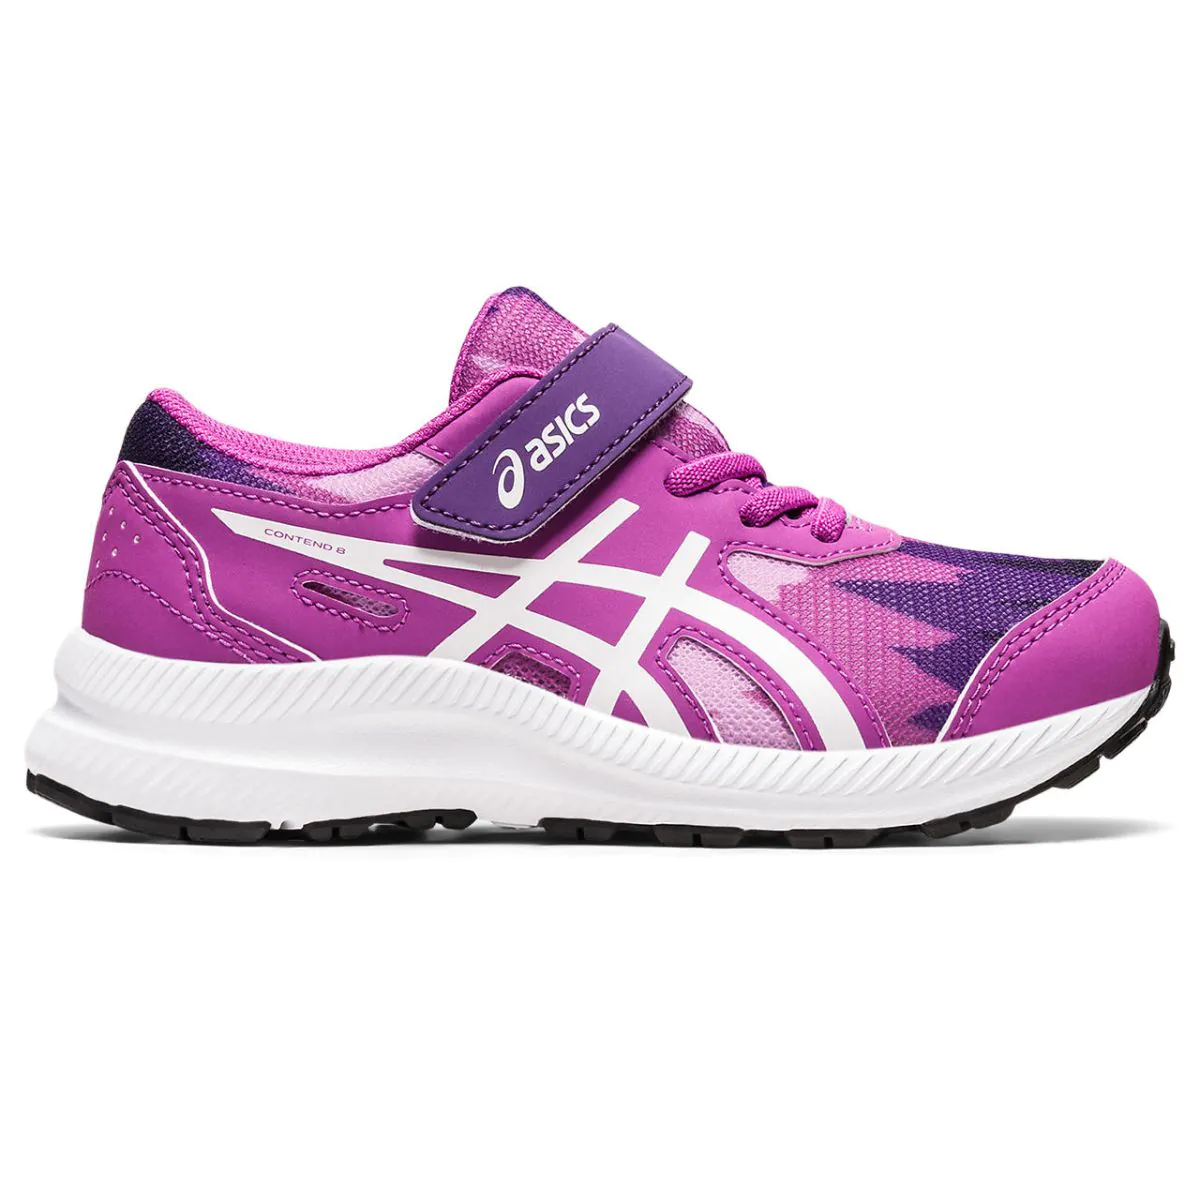 Asics Gontend 8 Print Kid's Running Shoes (PS) 1014A293-500